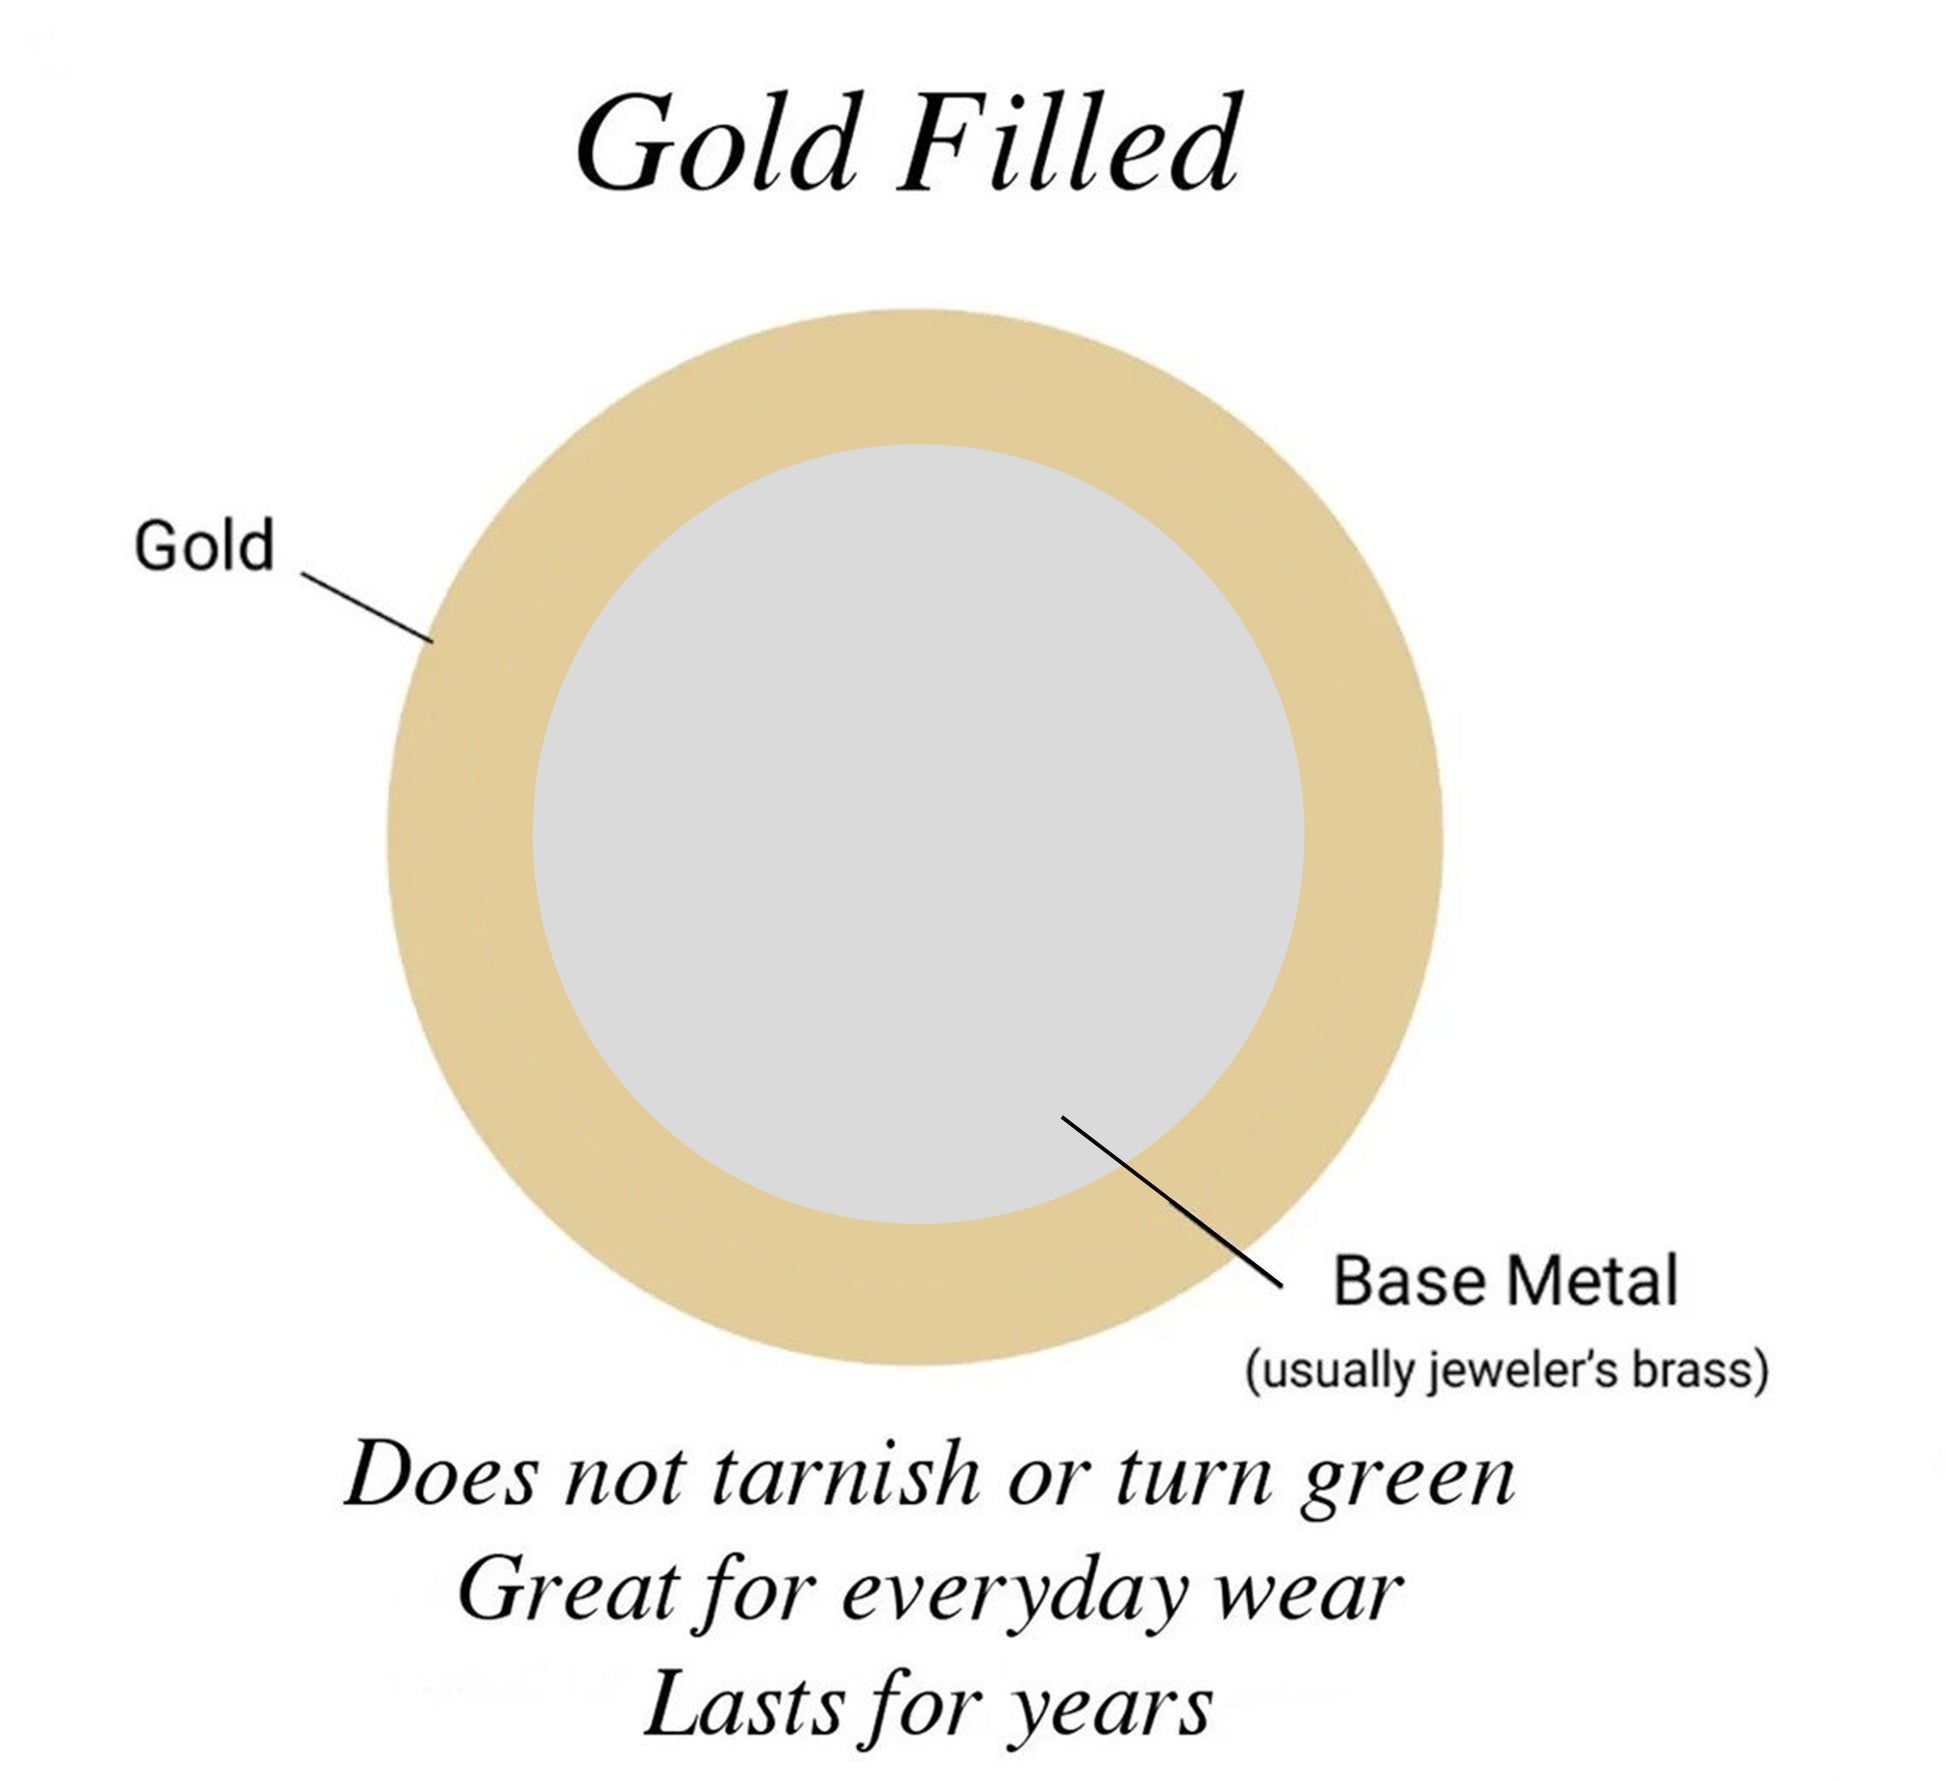 Gold filled educational diagram with descriptive text aginst a plain white background details the benefits of gold filled versus plated jewelry.